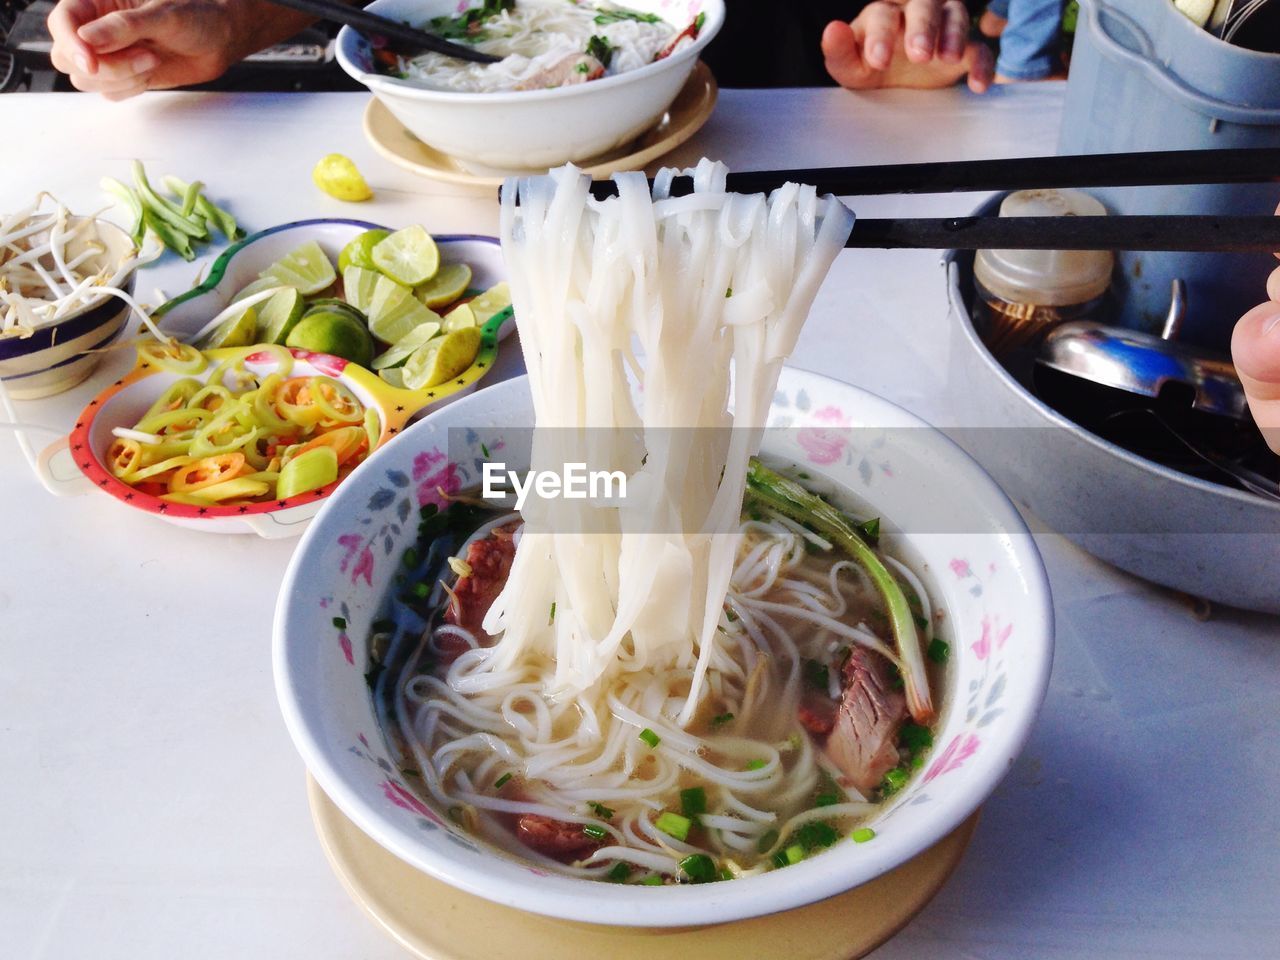 Chopsticks holding noodles in bowl on table